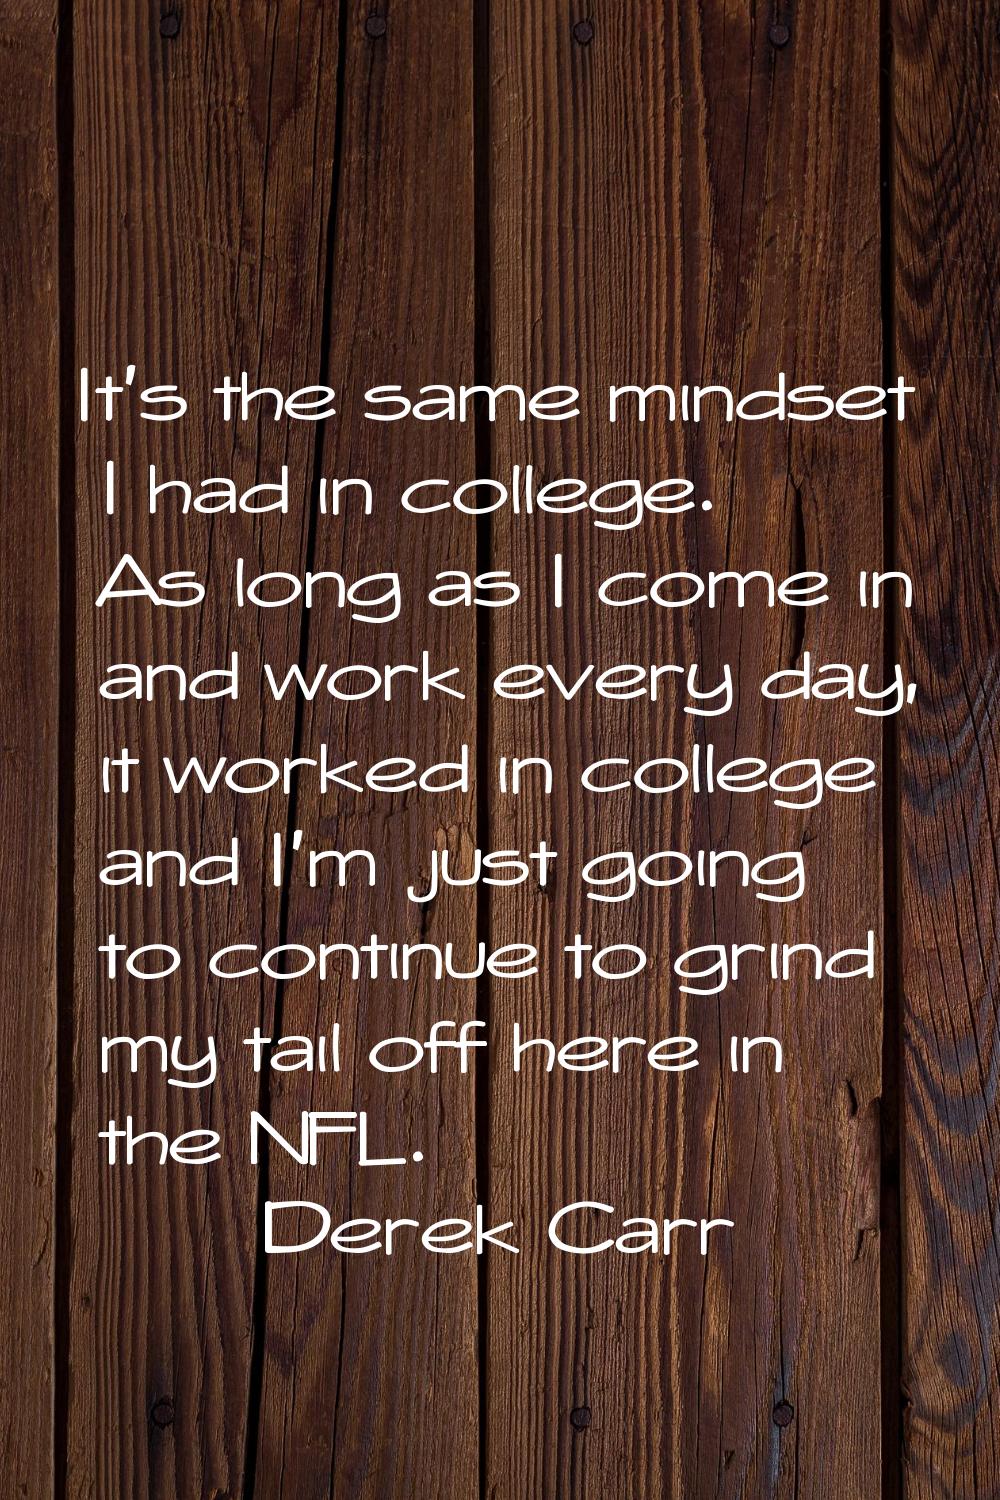 It's the same mindset I had in college. As long as I come in and work every day, it worked in colle